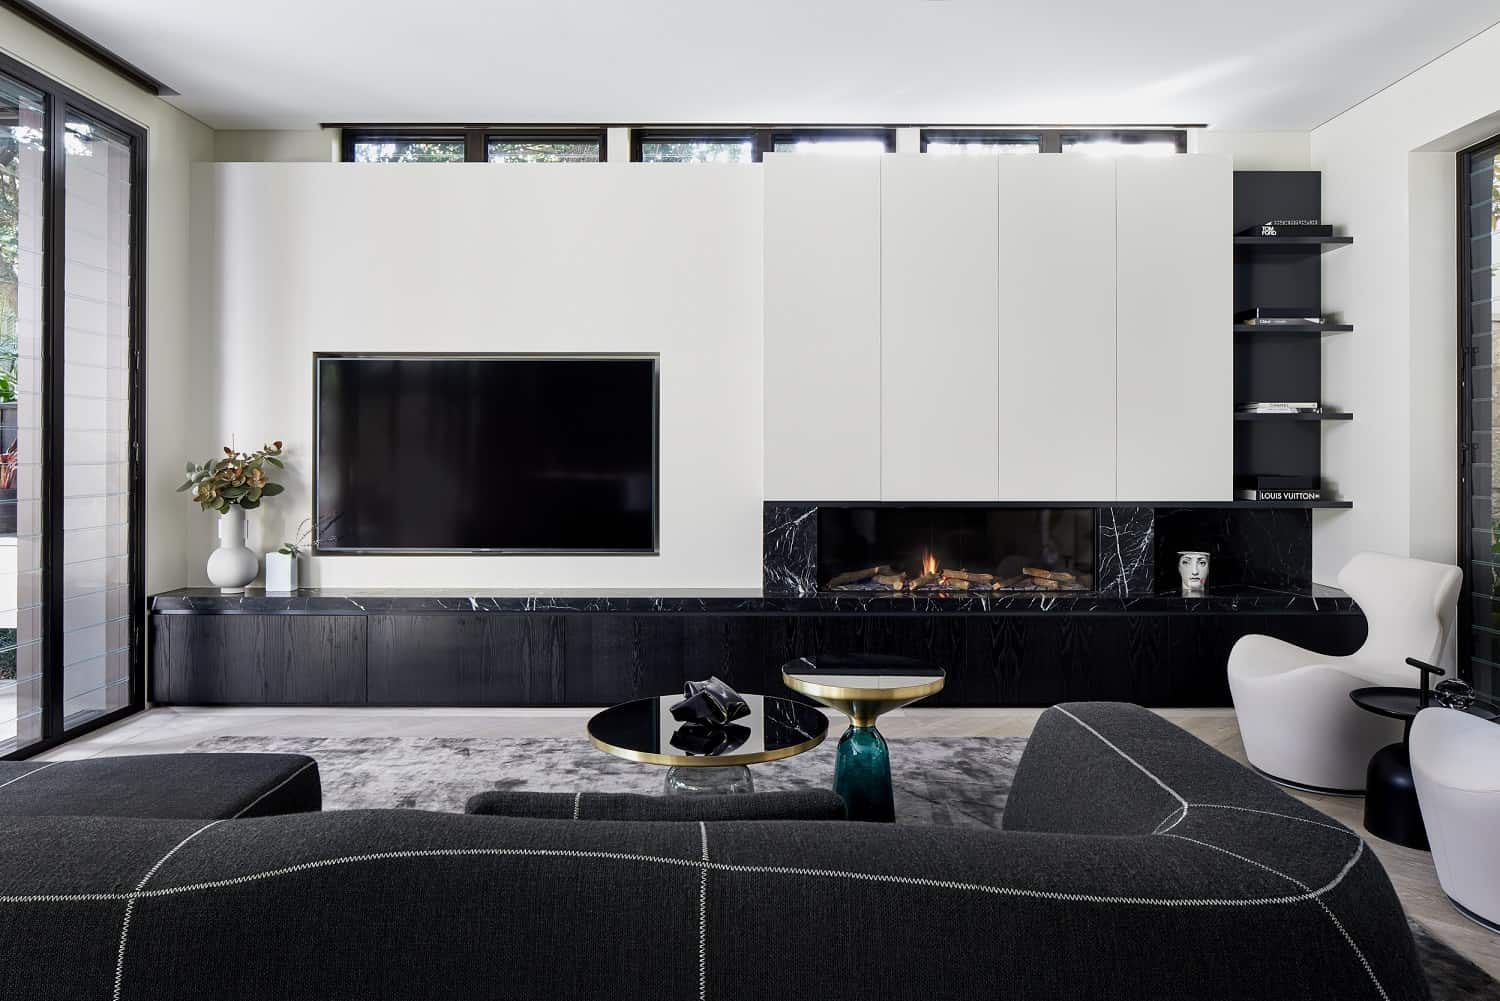 Top 5 Fireplaces for Winter 2022 Escea DS Sydney